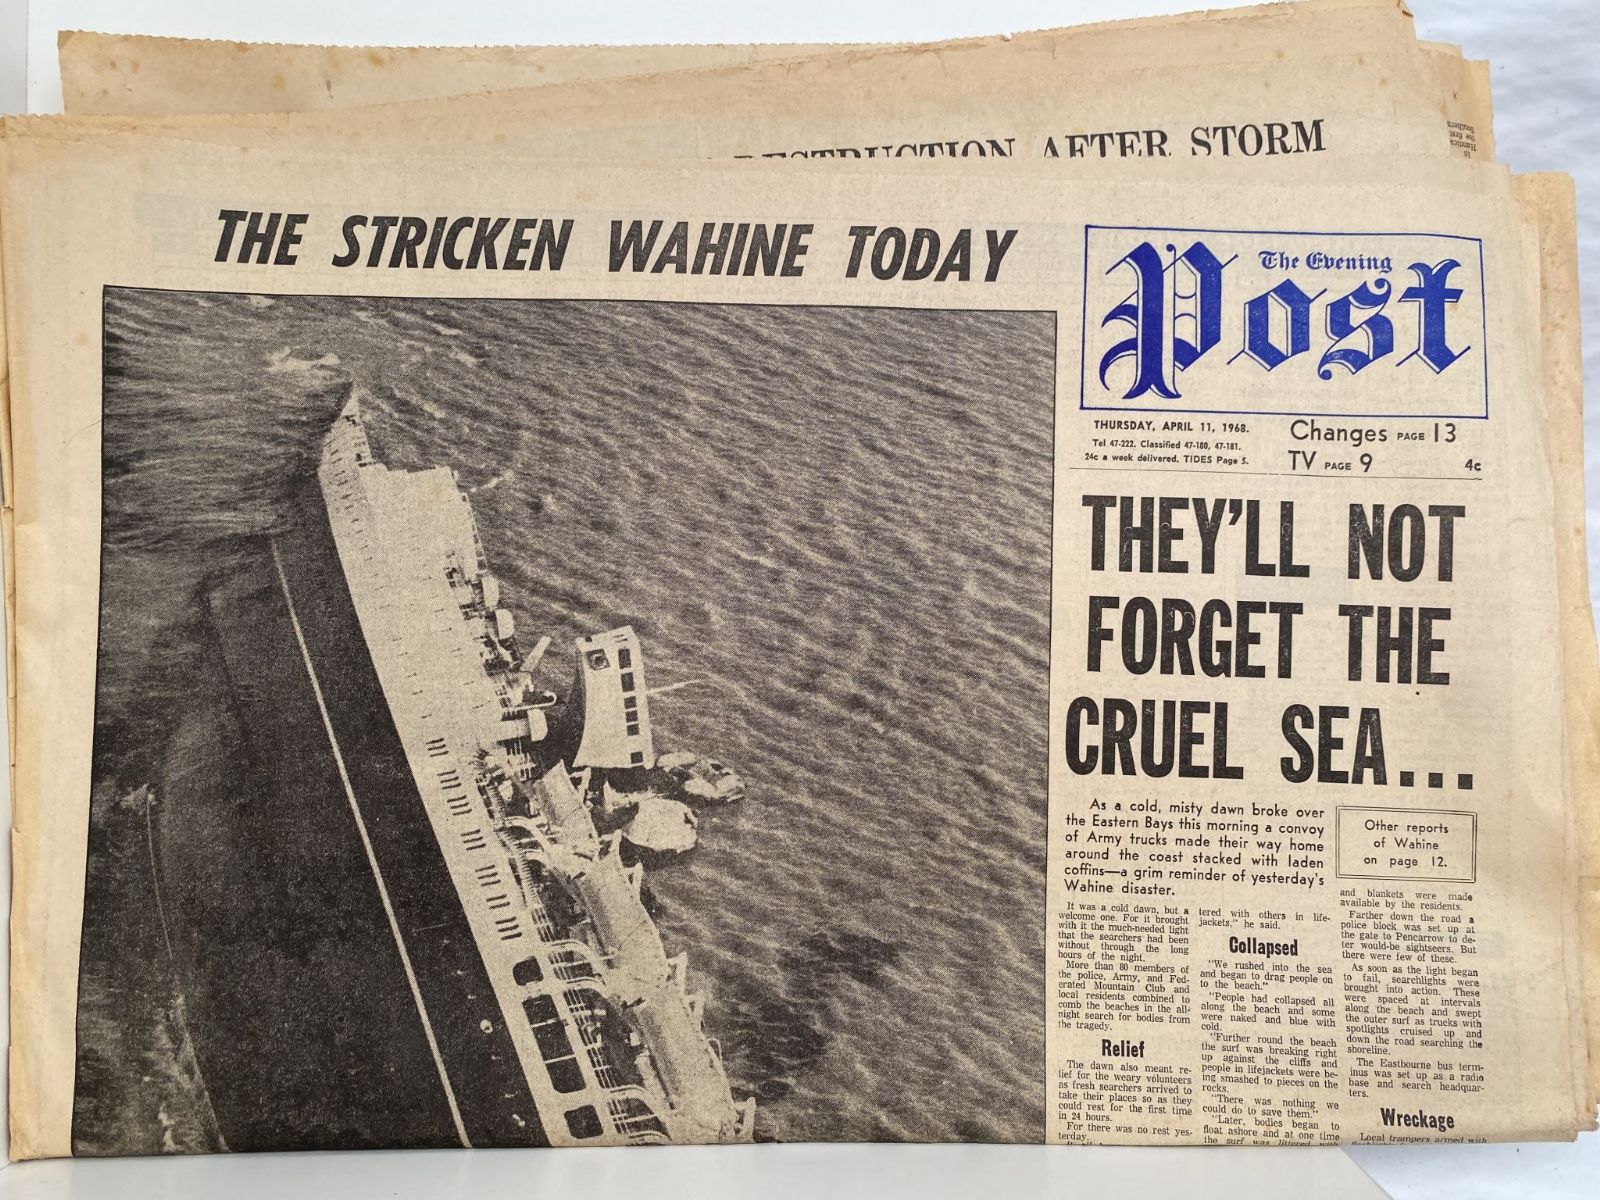 OLD NEWSPAPER: The Evening Post, 11 April 1968 - Wahine Disaster